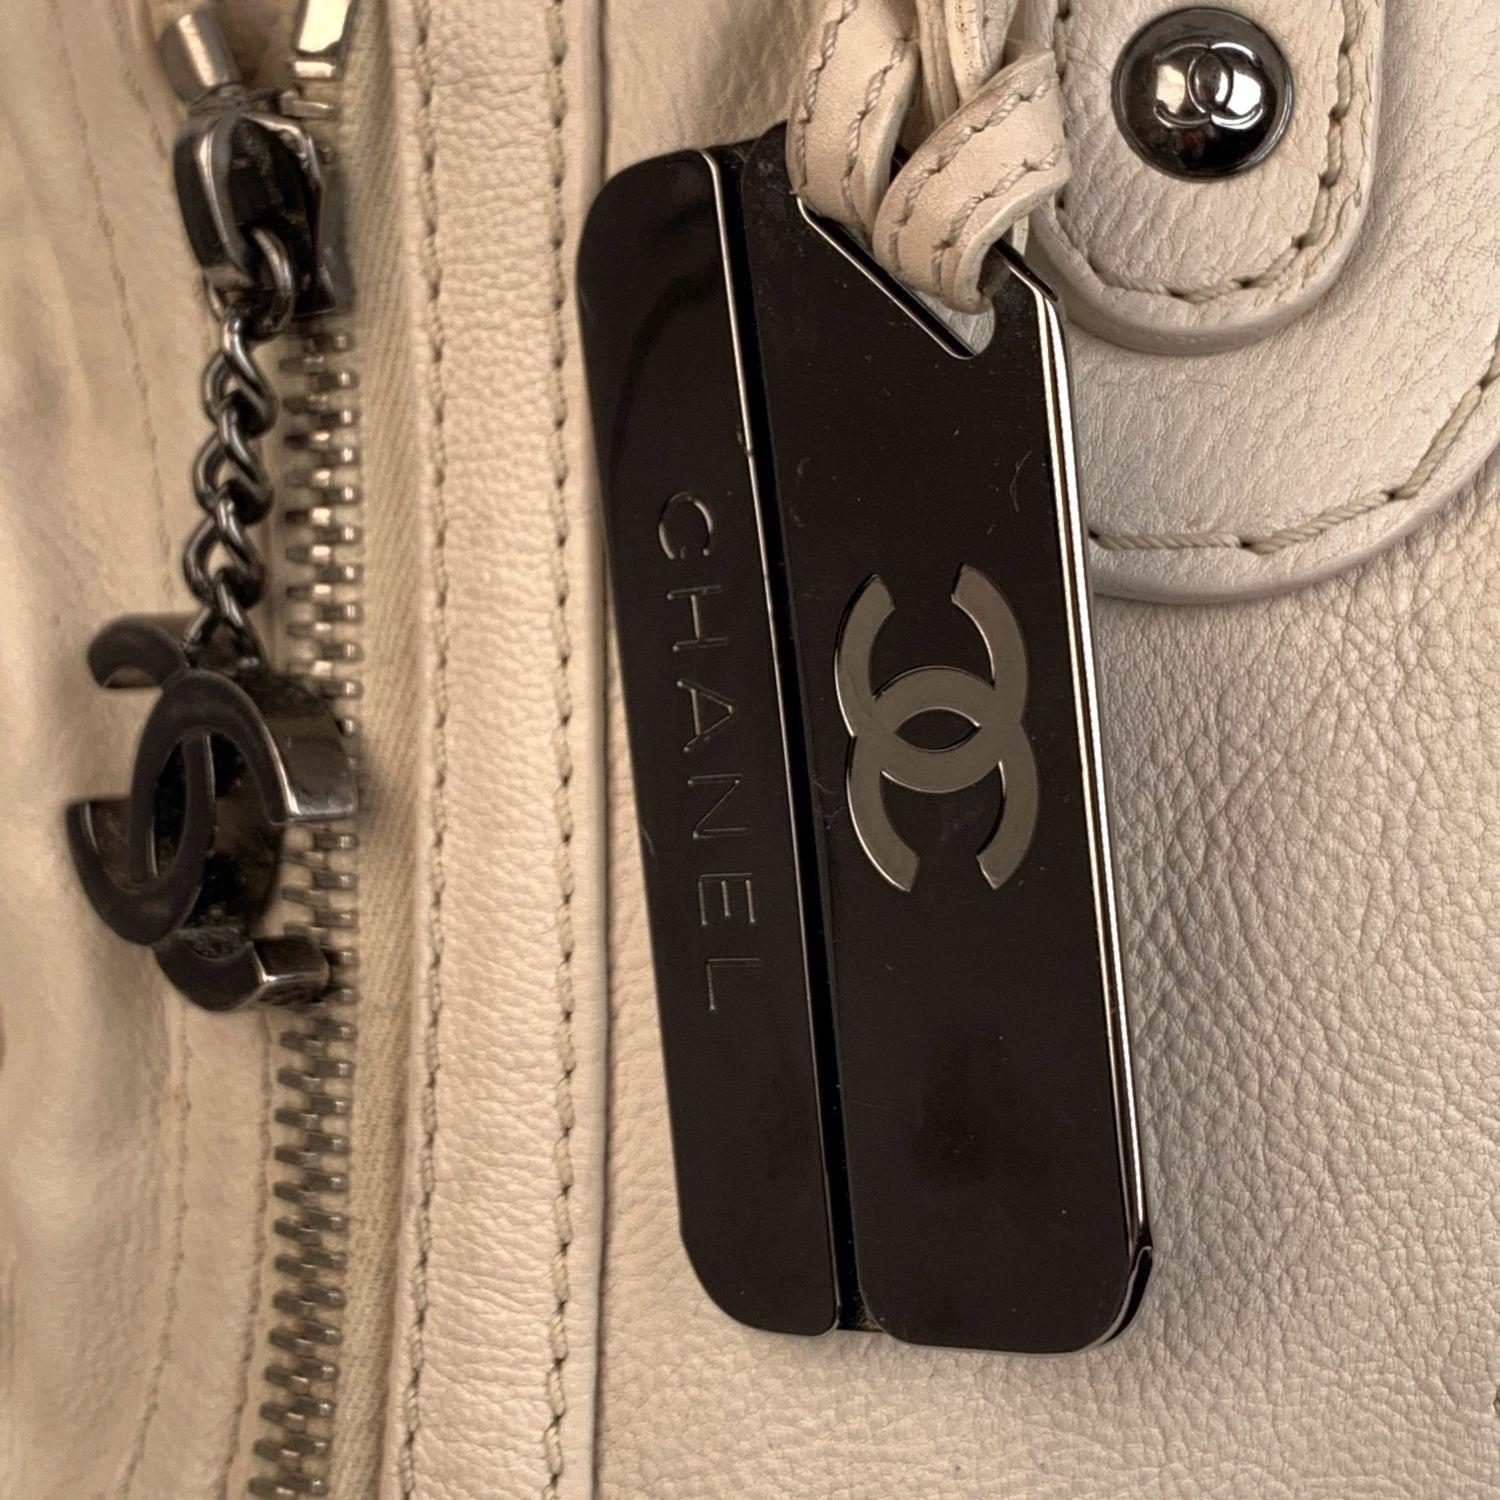 This bag will come with a Certificate of Authenticity provided by Entrupy, at no further cost.

Beautiful white leather bowling bag by CHANEL with CC Chanel logo on the front. Silver metal hardware. Side pockets with quilting. 1 front section with